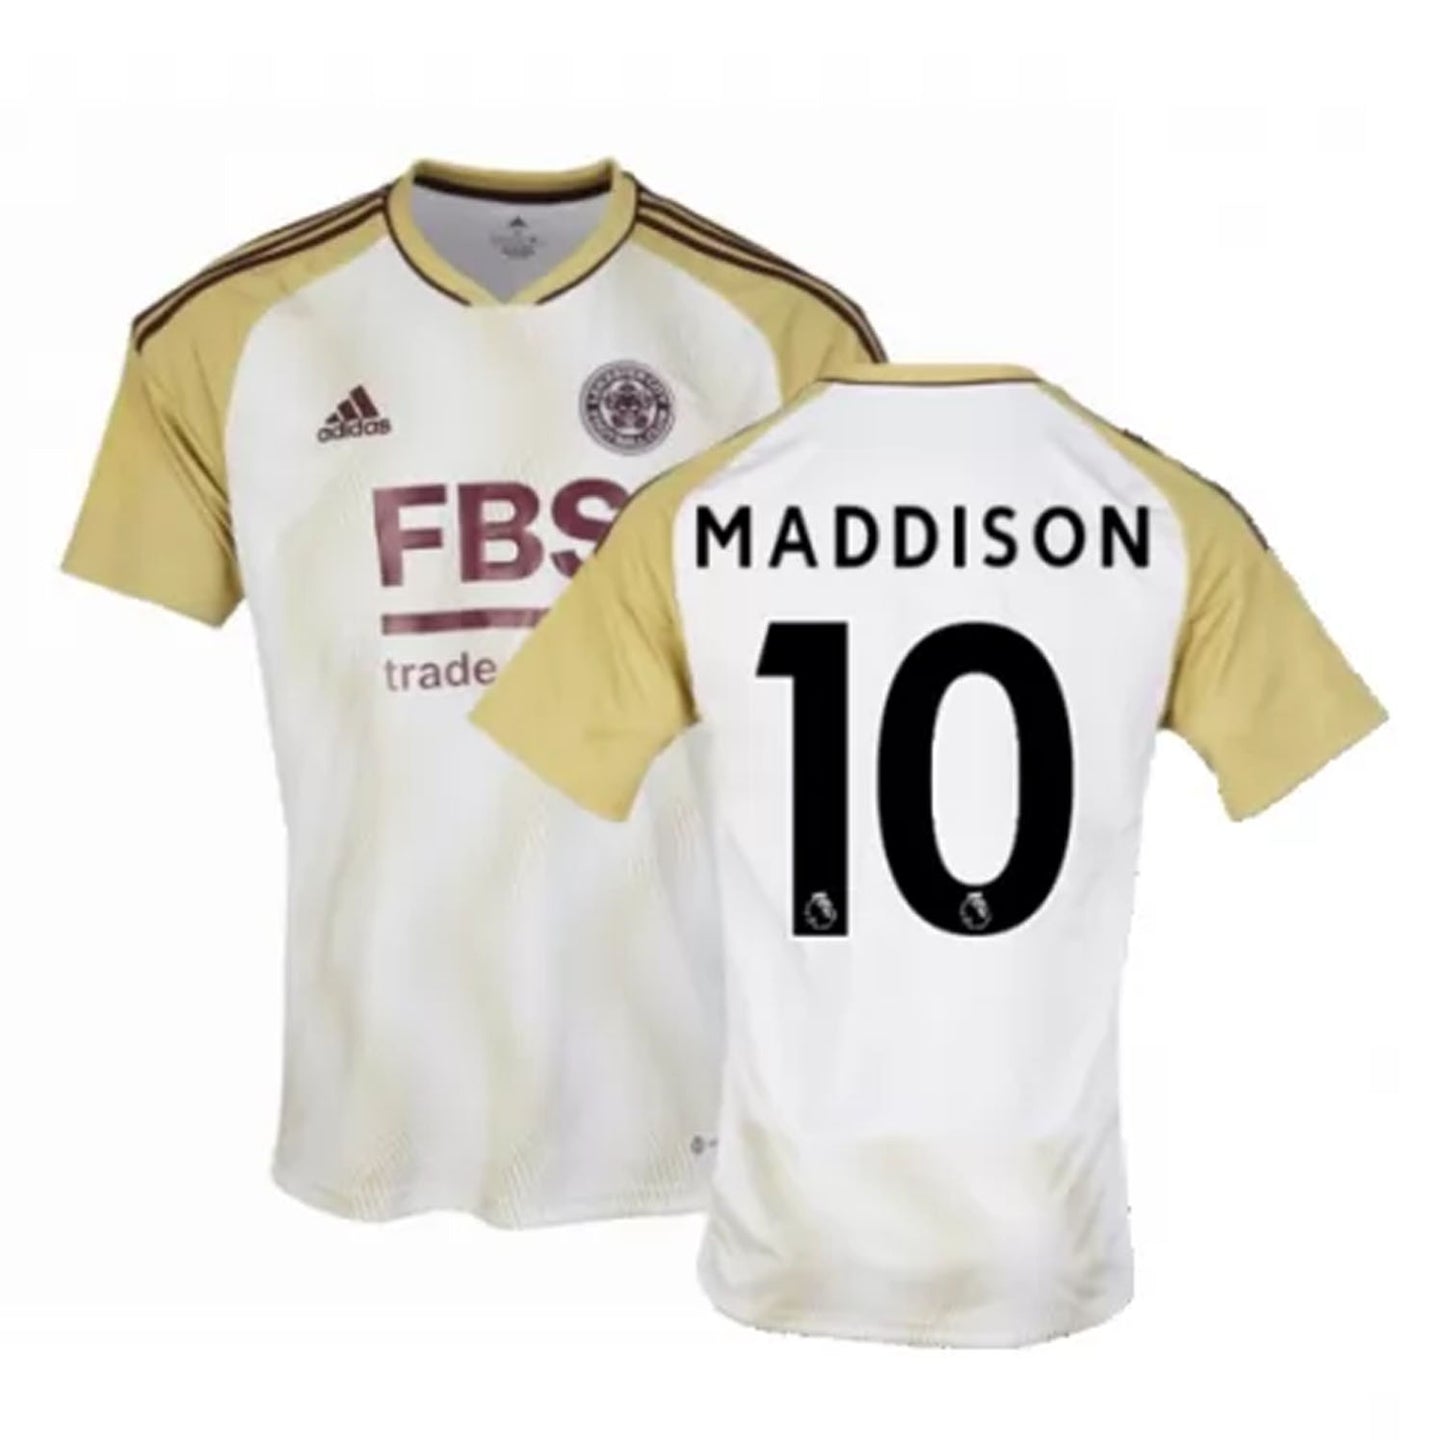 James Madison Leicester City 10 Jersey